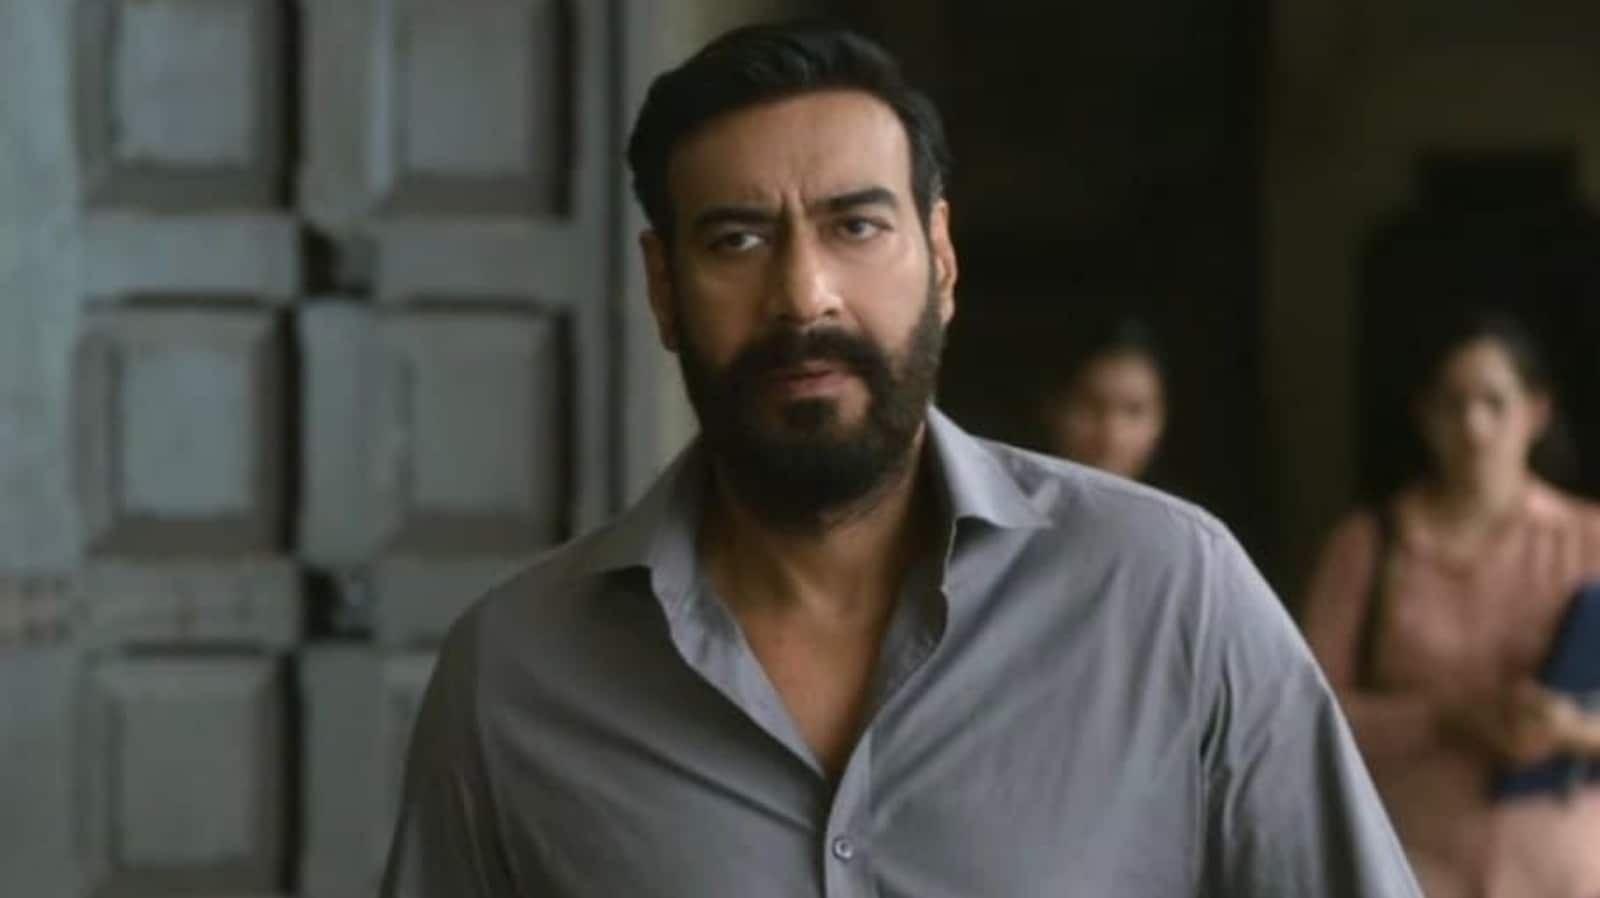 Drishyam 2 box office day 1 collection: Ajay Devgn film beats Ram Setu, has second biggest opening for Bollywood in 2022